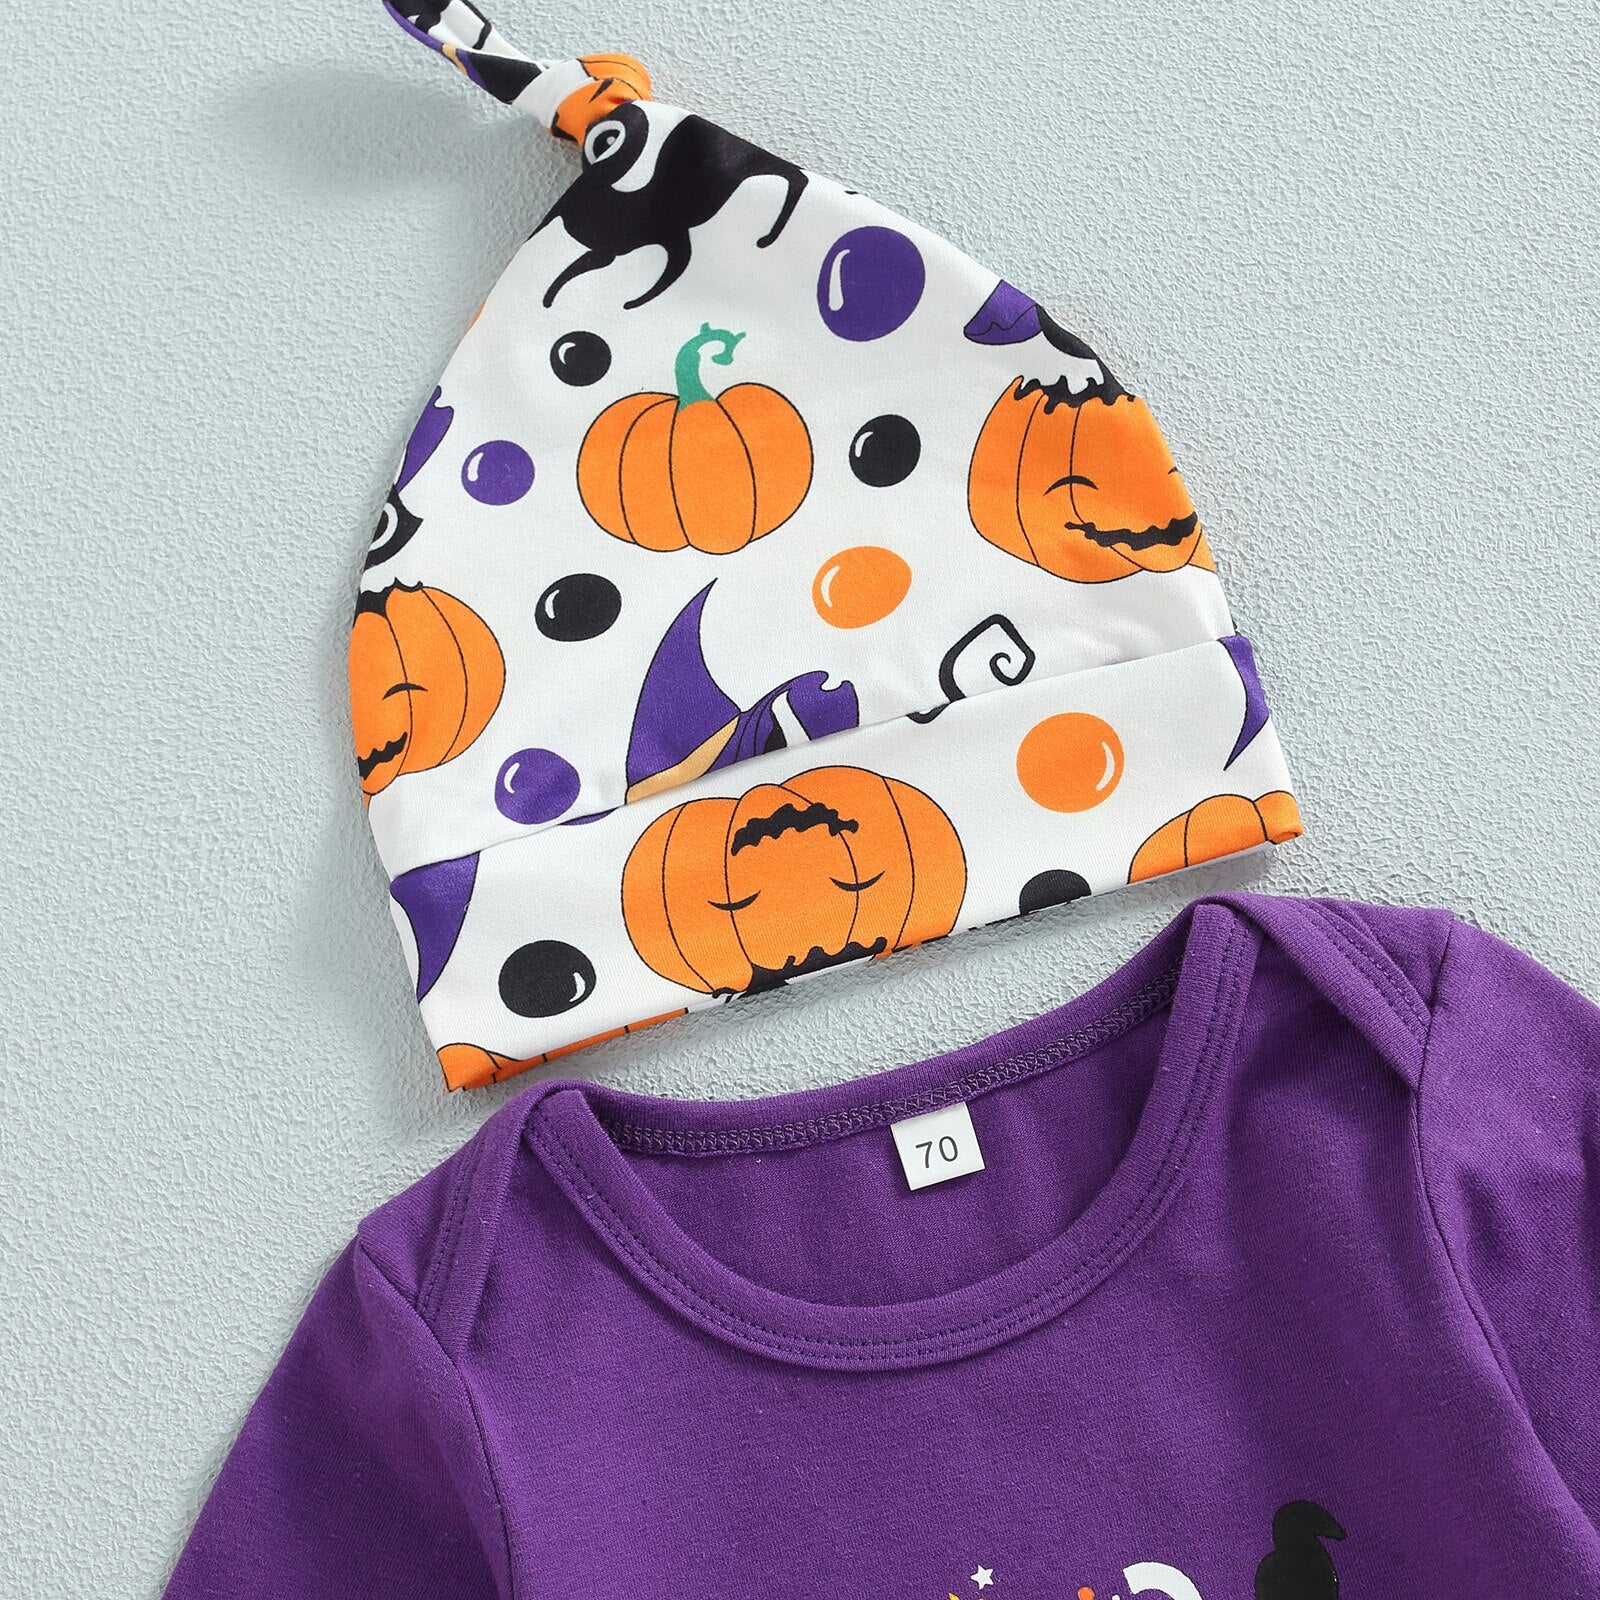 Spooky Cute: Halloween Baby Clothes Set for Girls and Boys